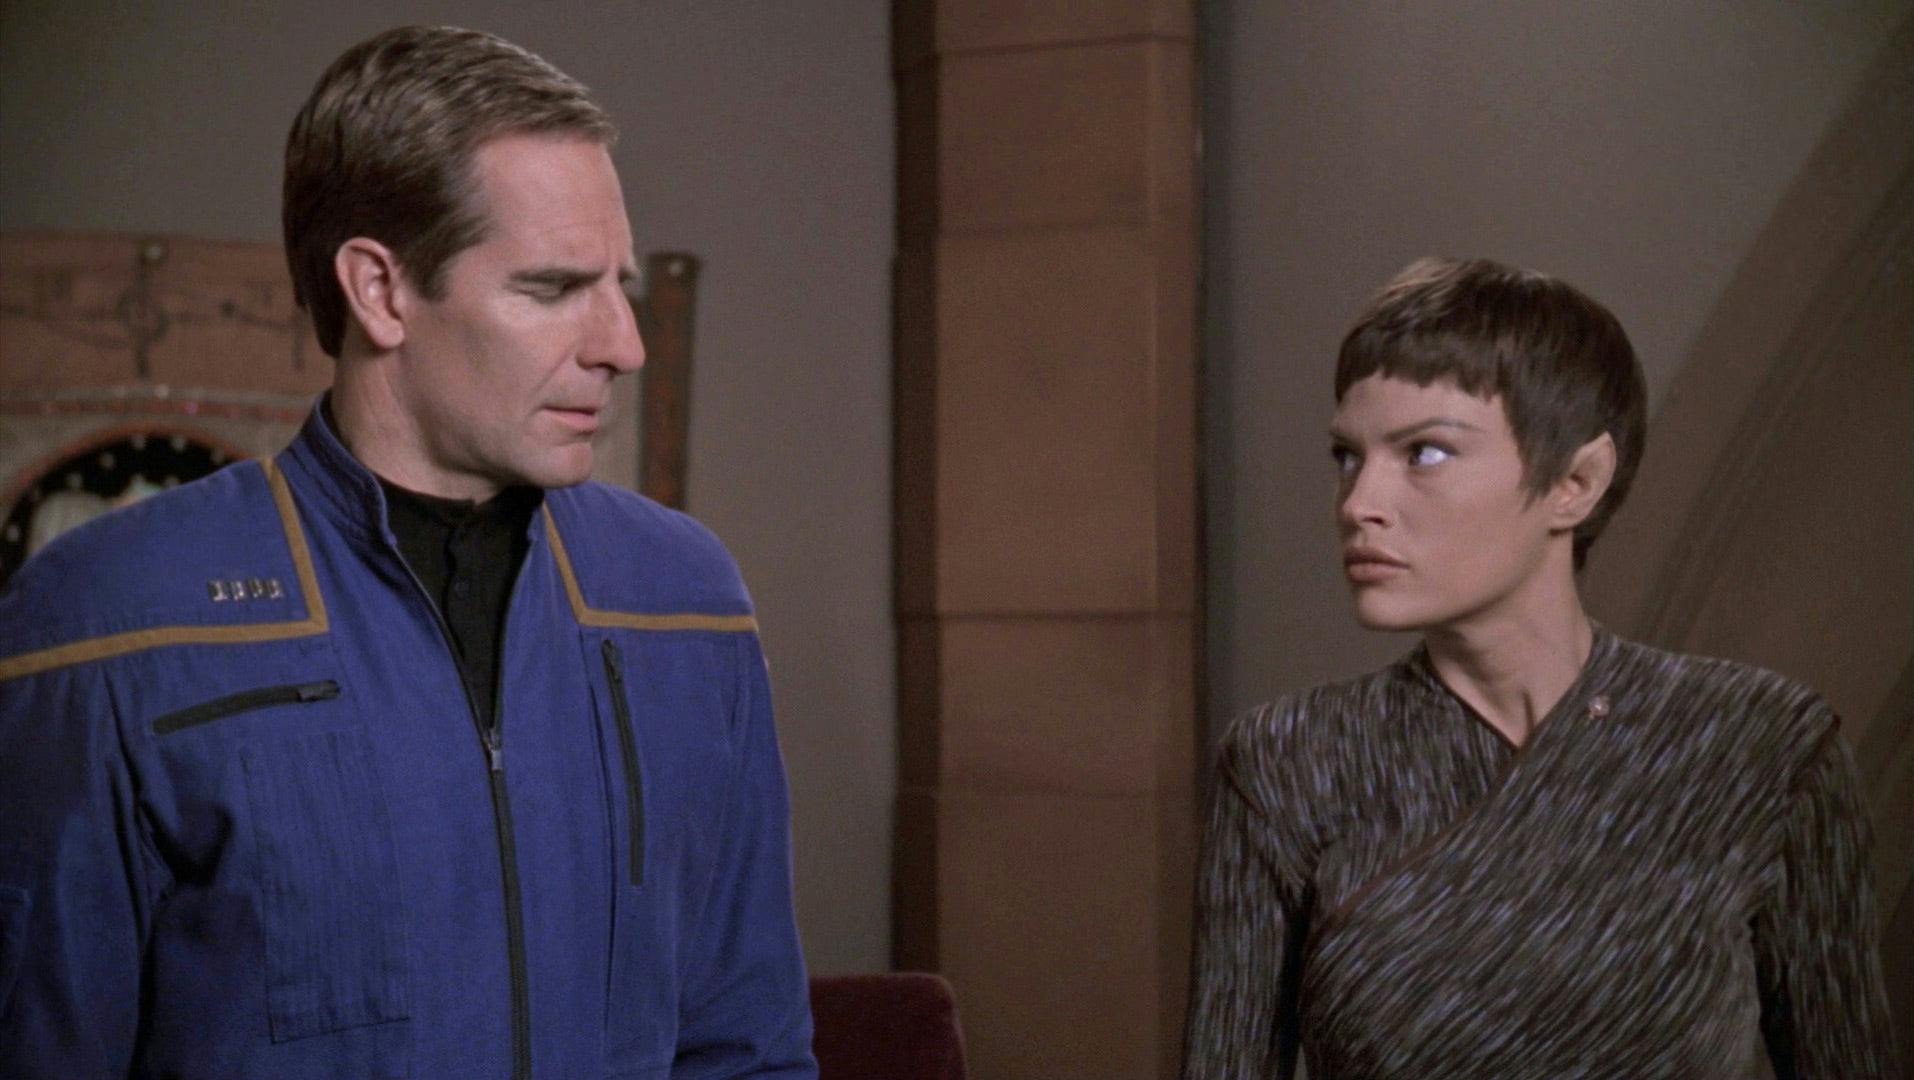 Archer closes his eyes as T'Pol looks up at him